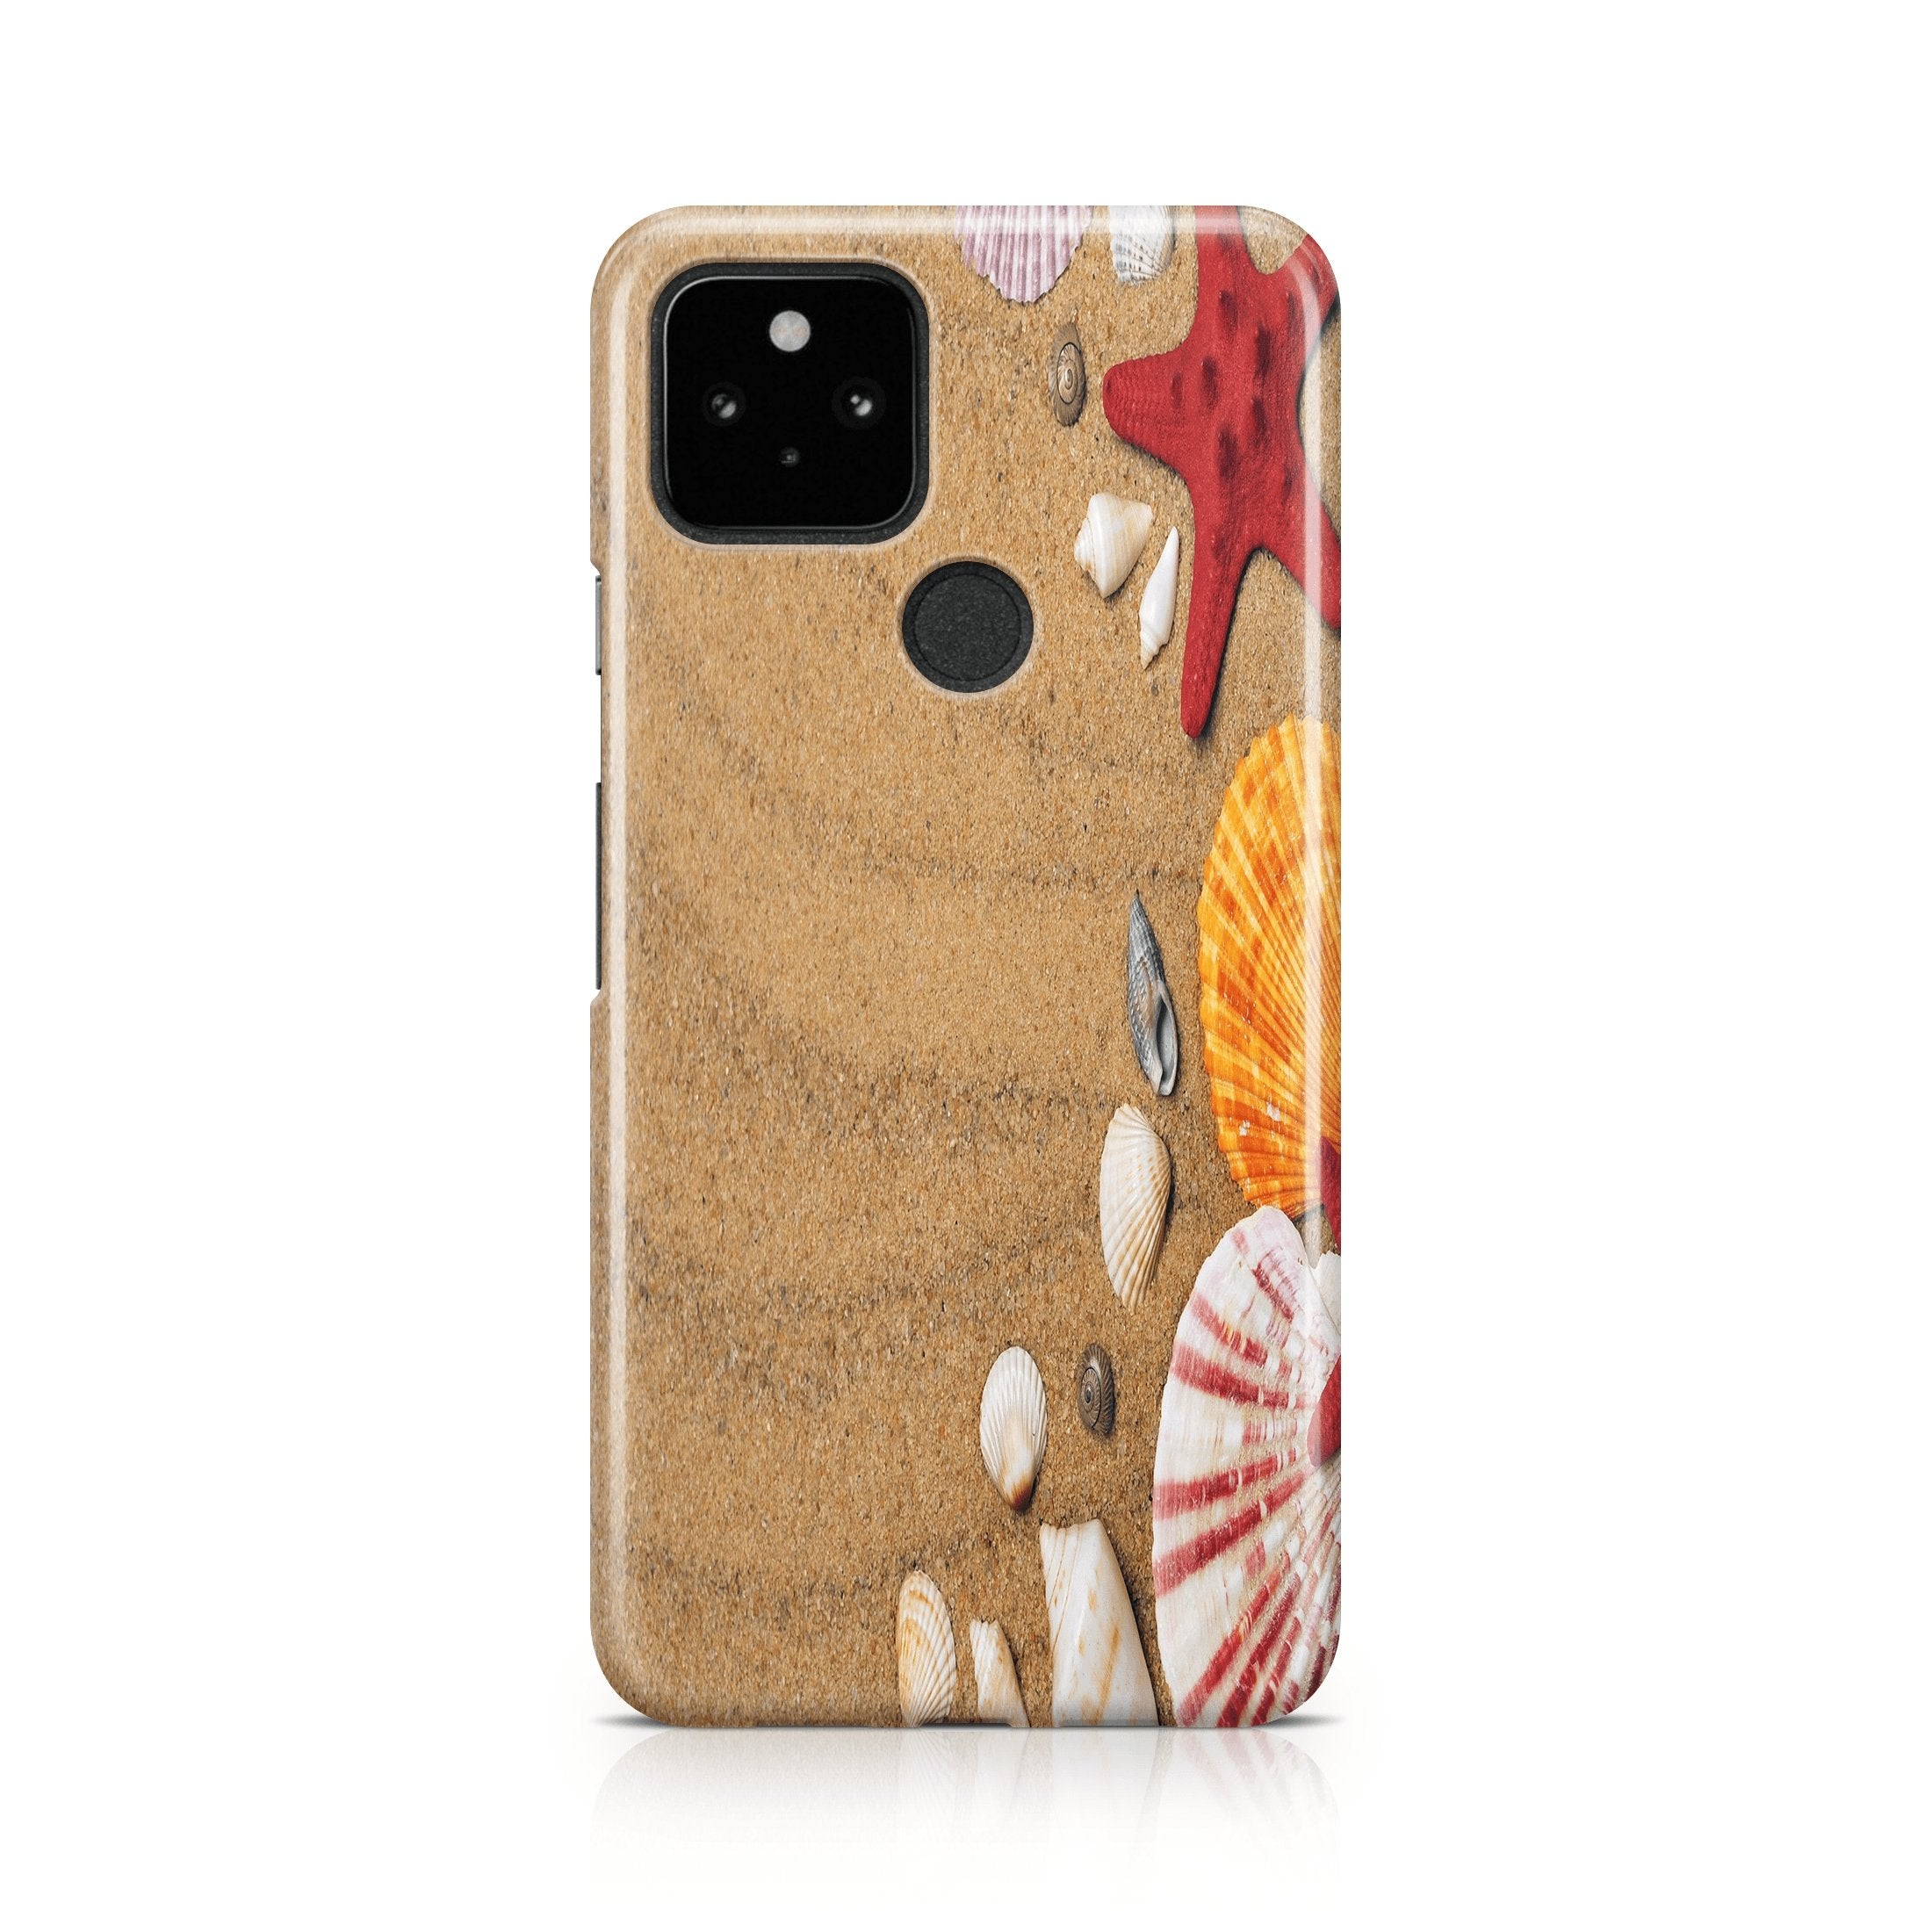 Beach Time - Google phone case designs by CaseSwagger